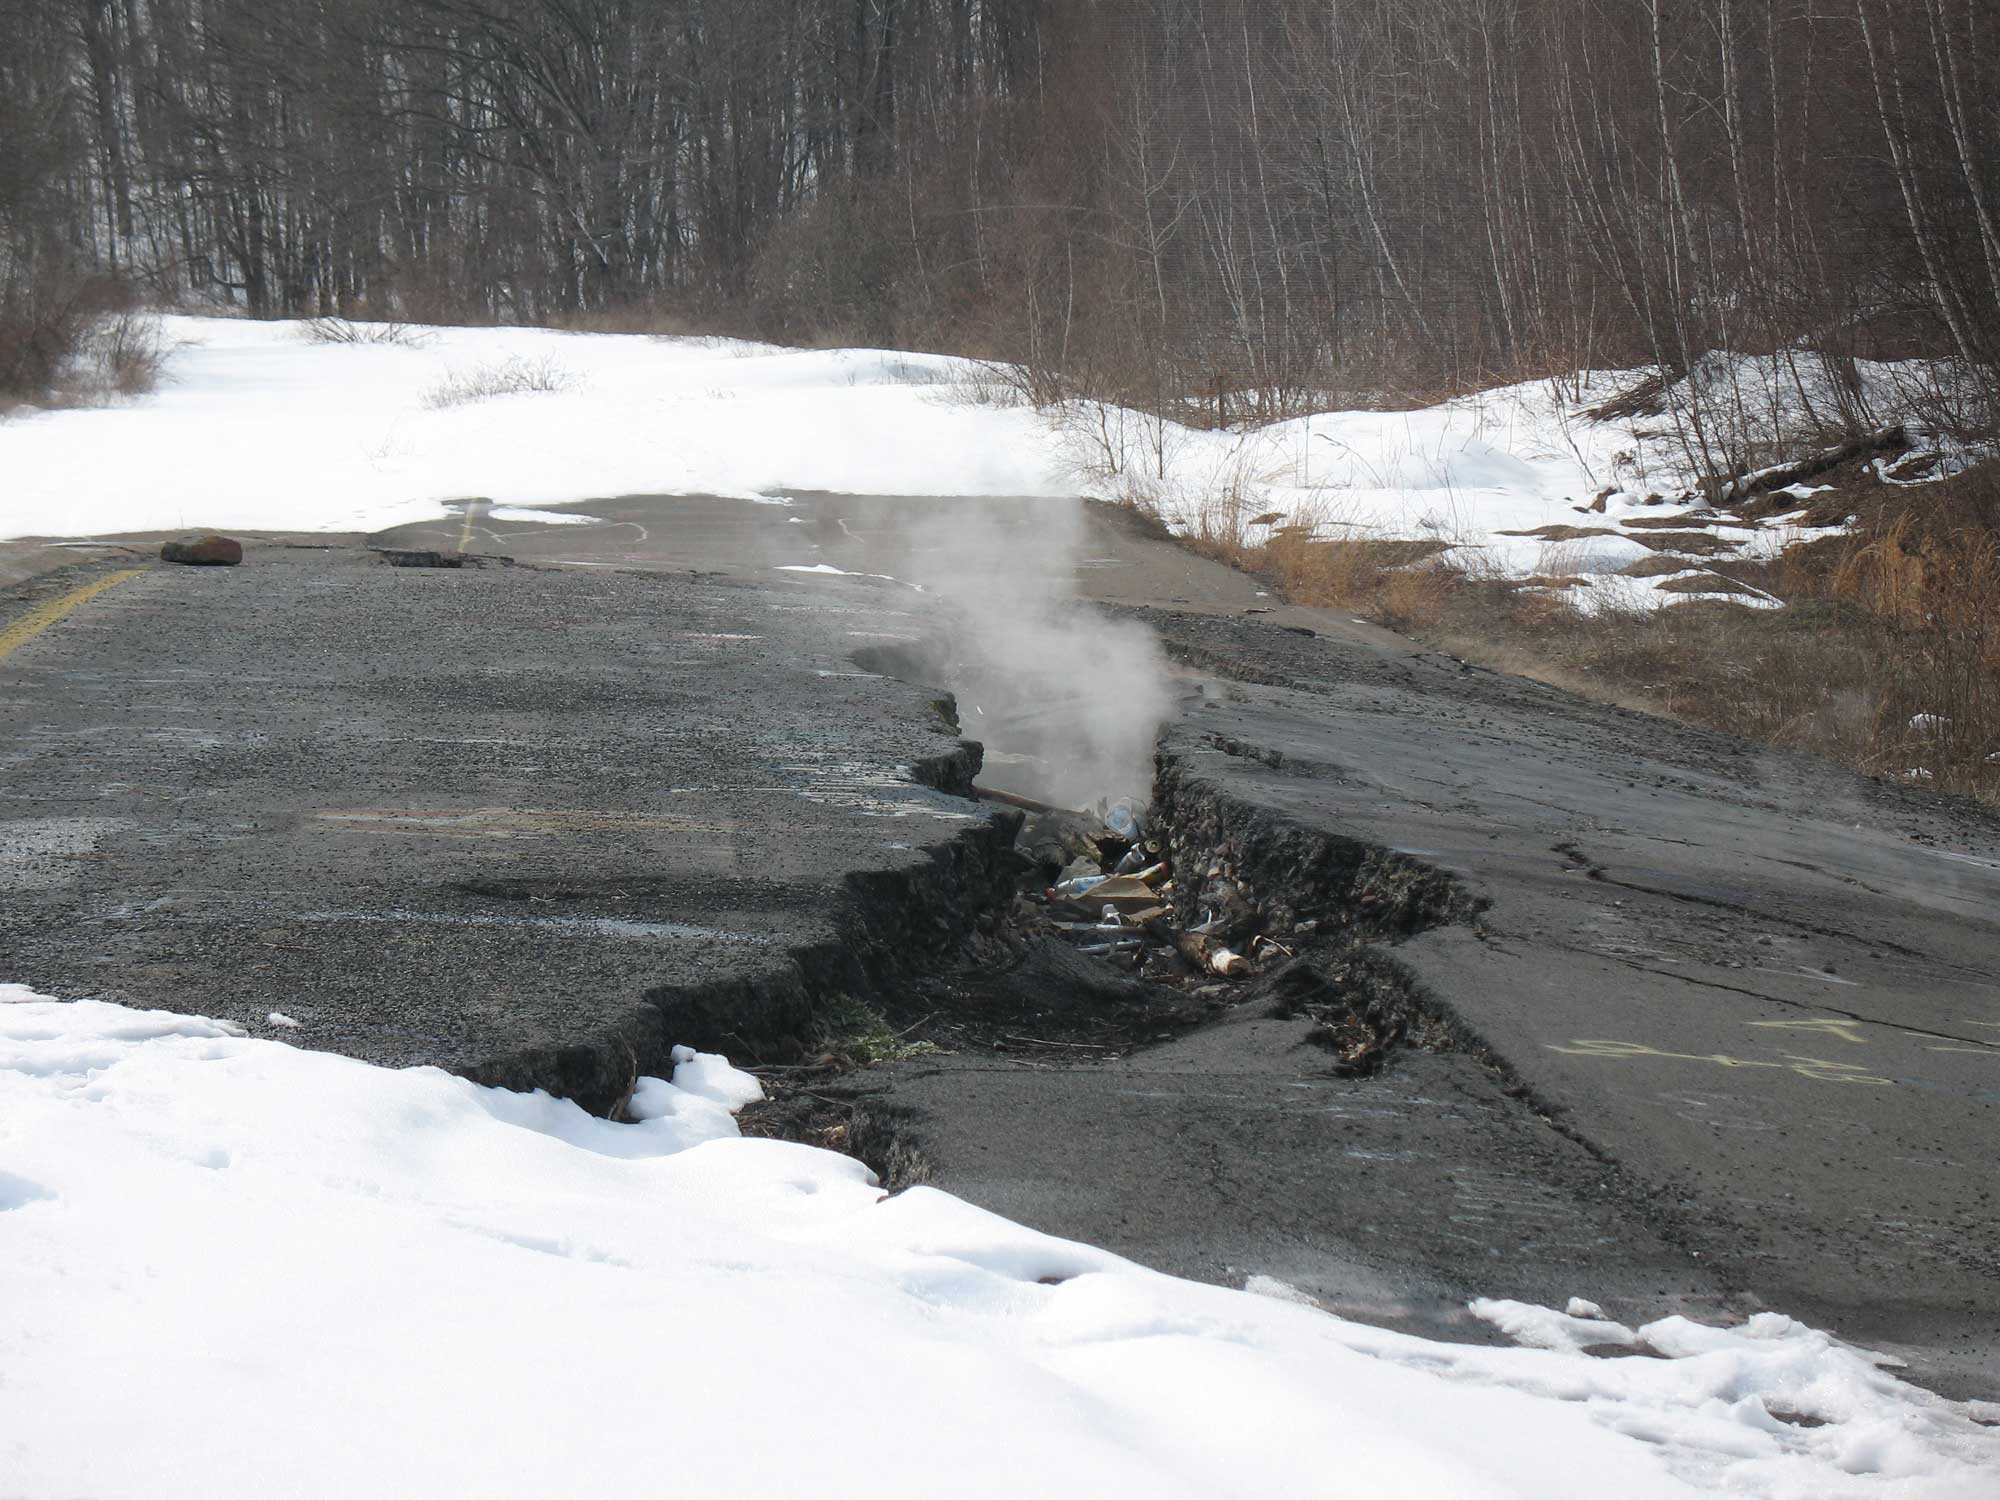 Photograph of the effects of the Centralia, Pennsylvania, underground mine fire from 2010. The photo shows an asphalt road with fissure in it and smoke coming out of the fissure. While the area immediately around the fissure has no snow, snow can be seen in the foreground and background of the image.